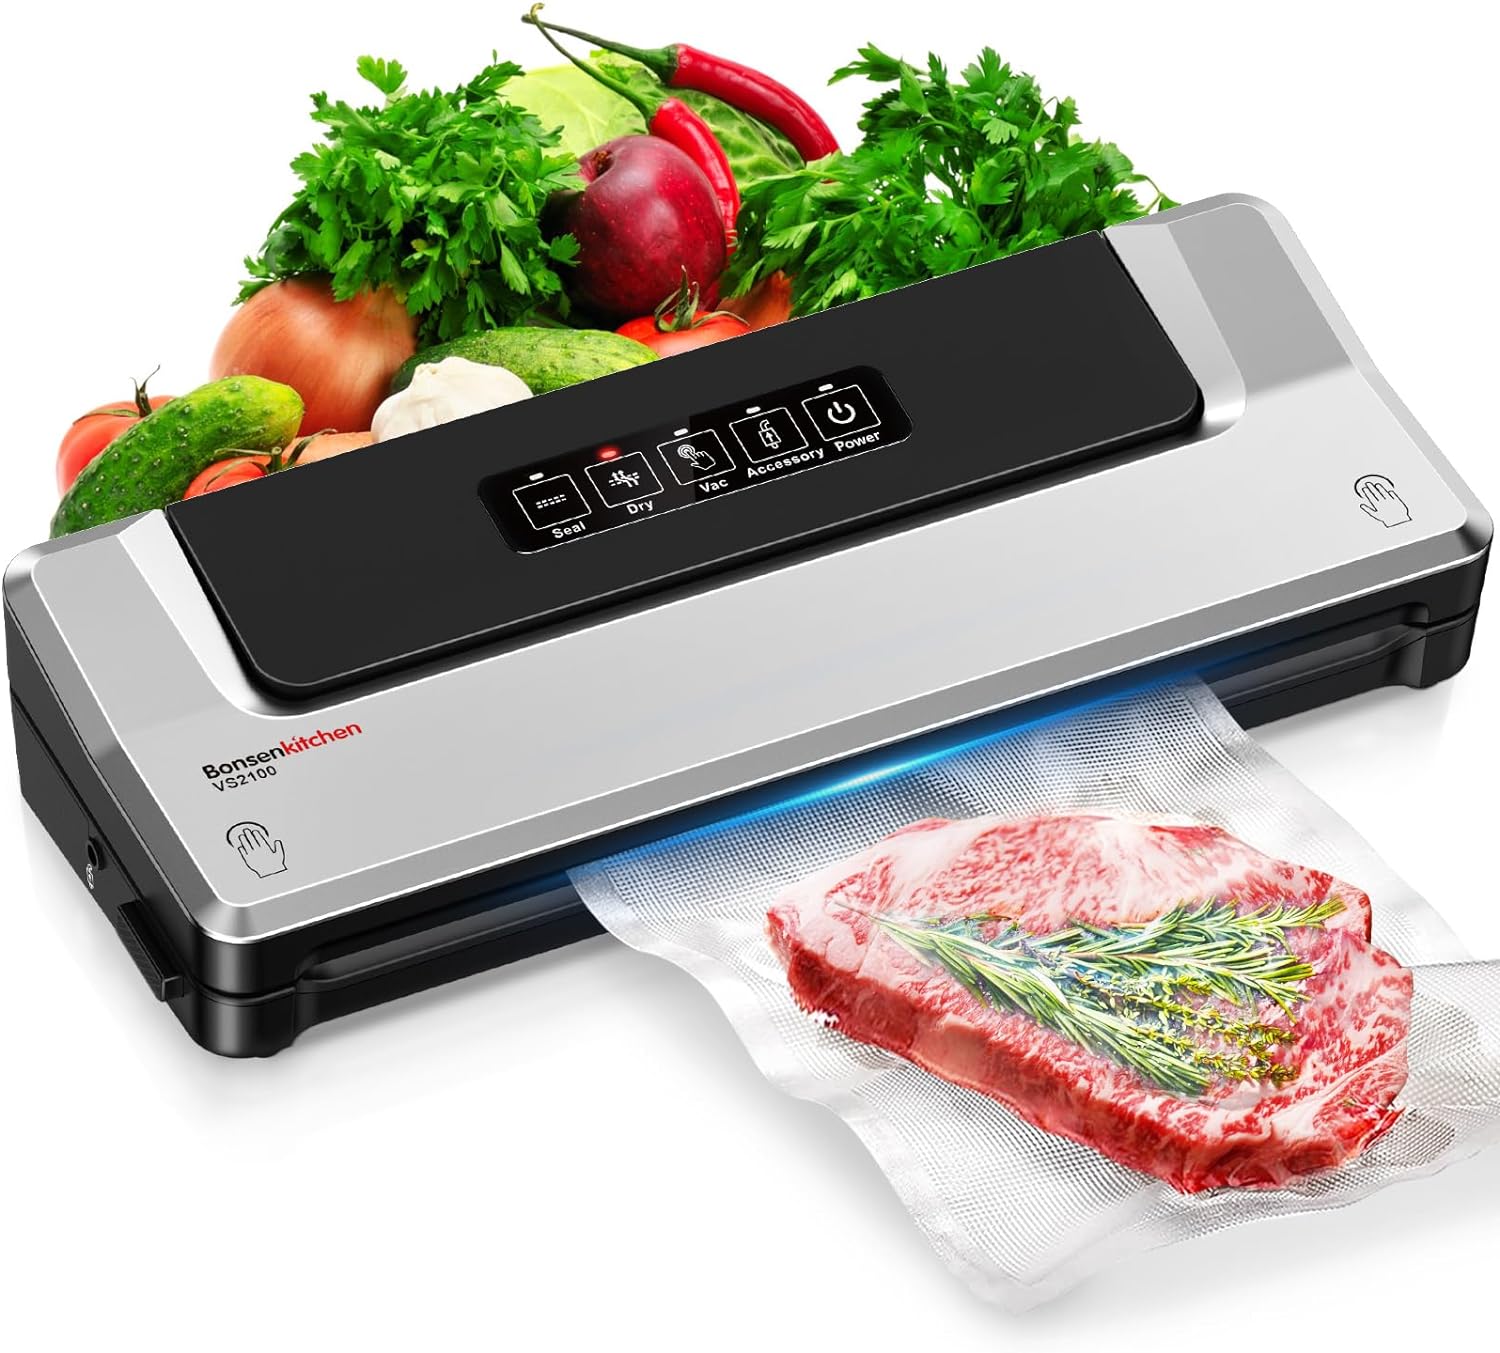 Bonsenkitchen Vacuum Sealer Machine with 5 Vacuum Seal Bags, Compact Food Sealer Machine with 5-in-1 Easy Options for Food Preservation, Air Sealer Machine with 1 Air Suc - $17.99